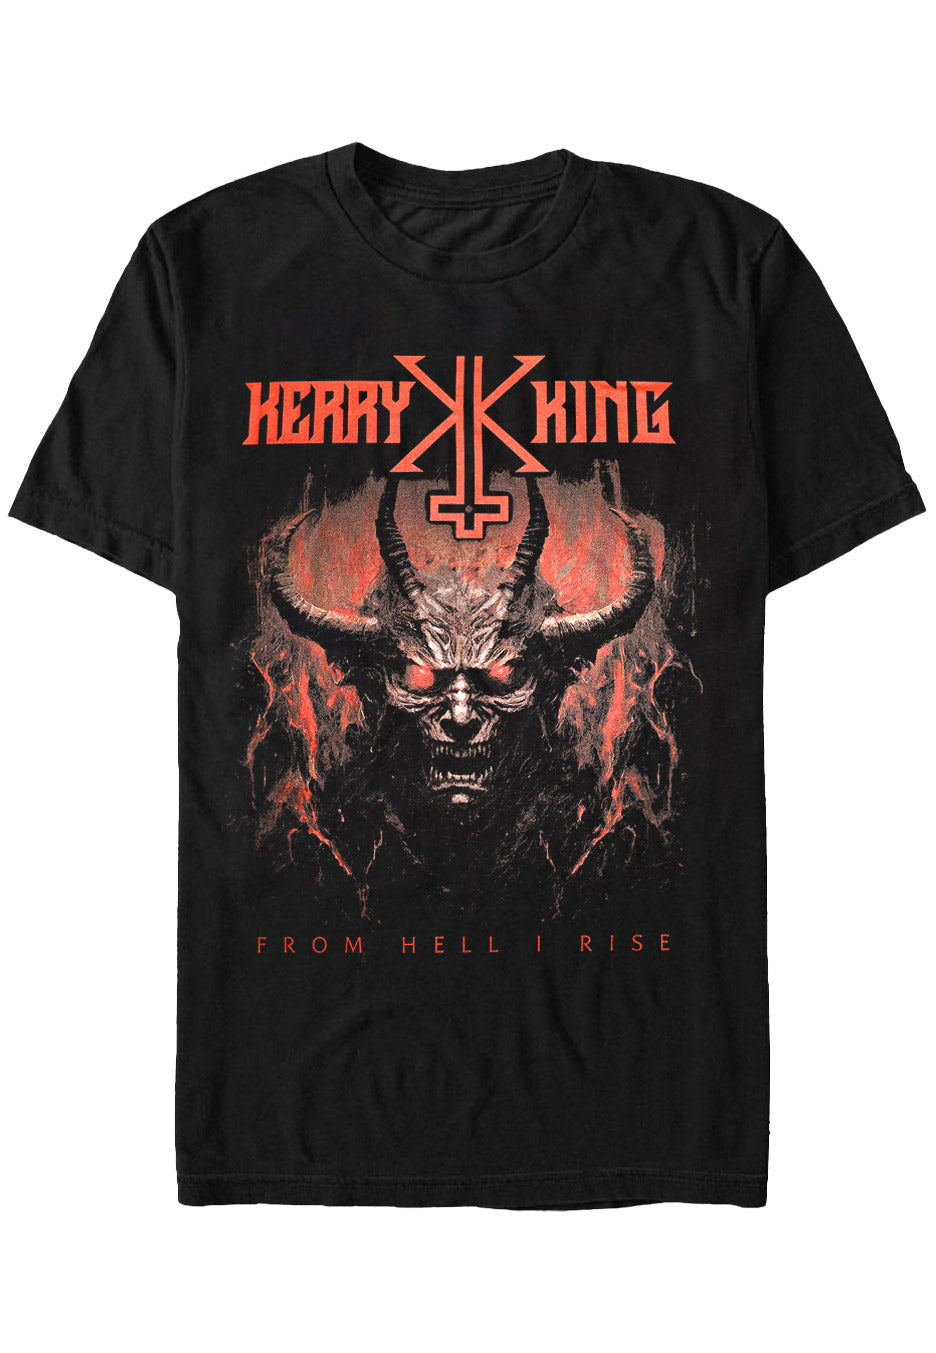 Kerry King - From Hell I Rise Cover V2 - T-Shirt